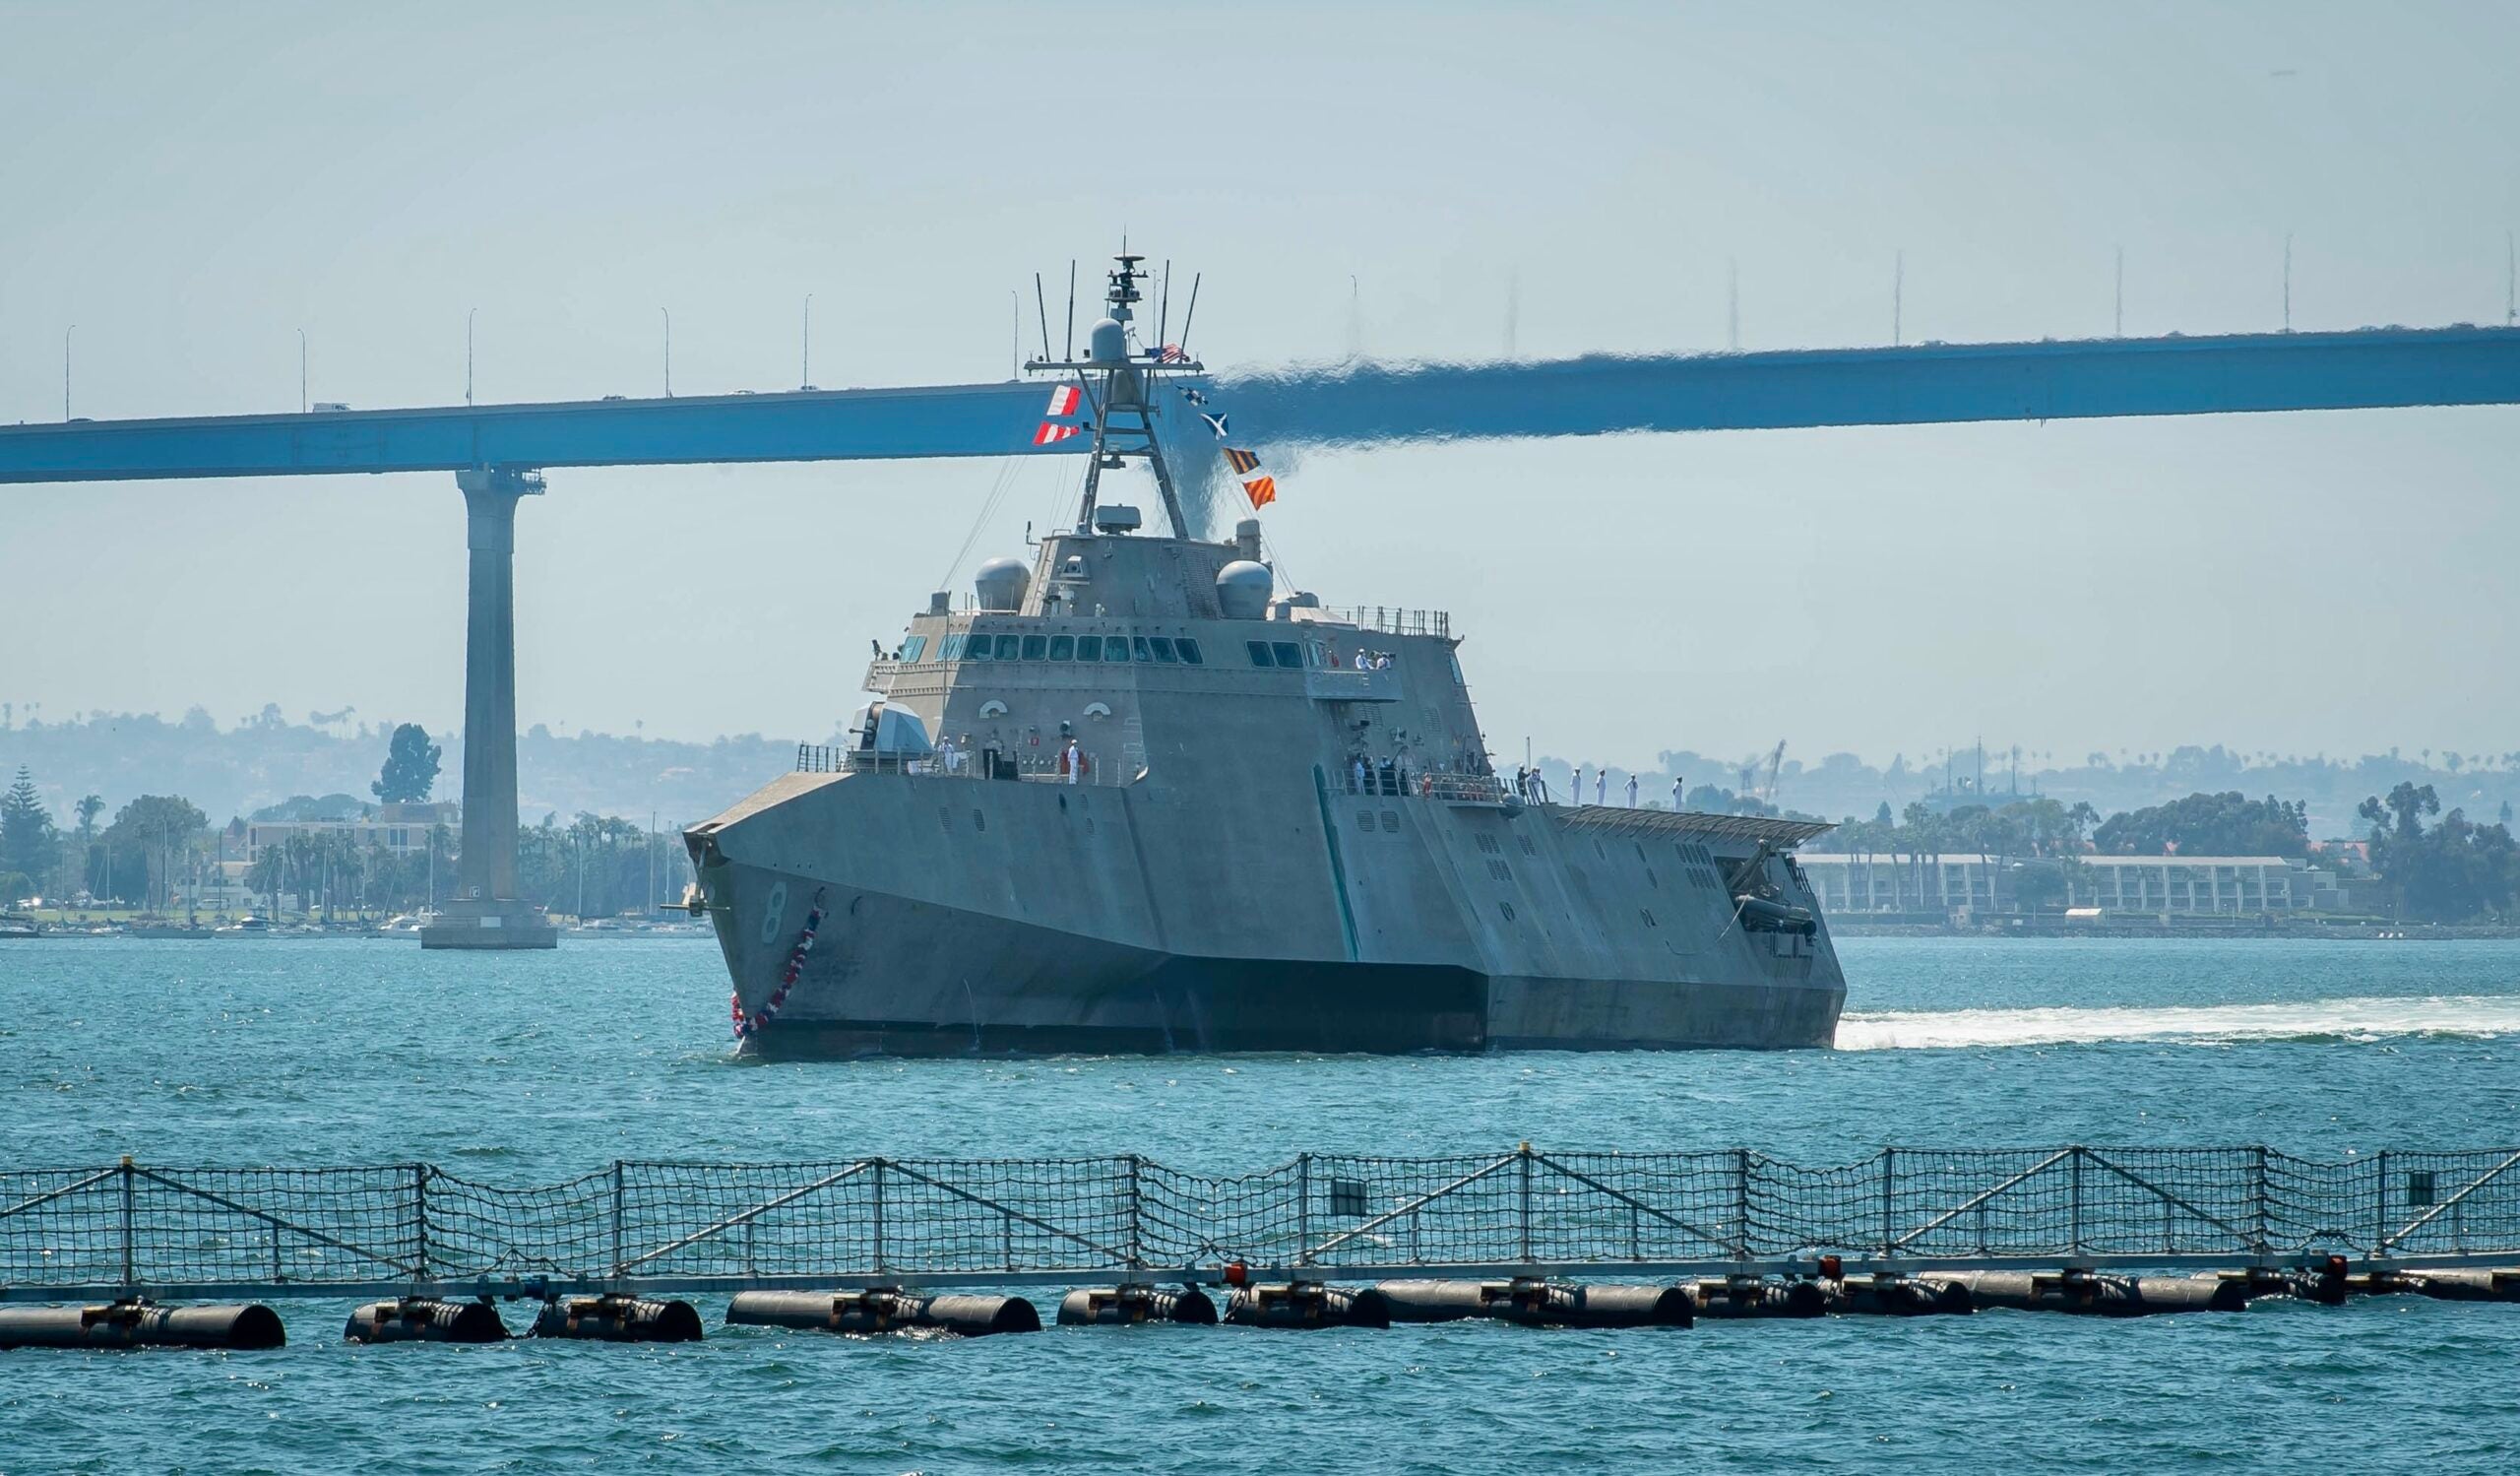 SAN DIEGO (June 10, 2020) – Independence-class Littoral combat ship USS Montgomery (LCS 8) returns to its homeport of San Diego following the successful completion a 12-month rotational deployment. The ship operated in the U.S. 7th Fleet area of operations to enhance interoperability with partners and serve as a ready-response force. (U.S. Navy photo by Mass Communication Specialist 2nd Class Alex Corona/Released)